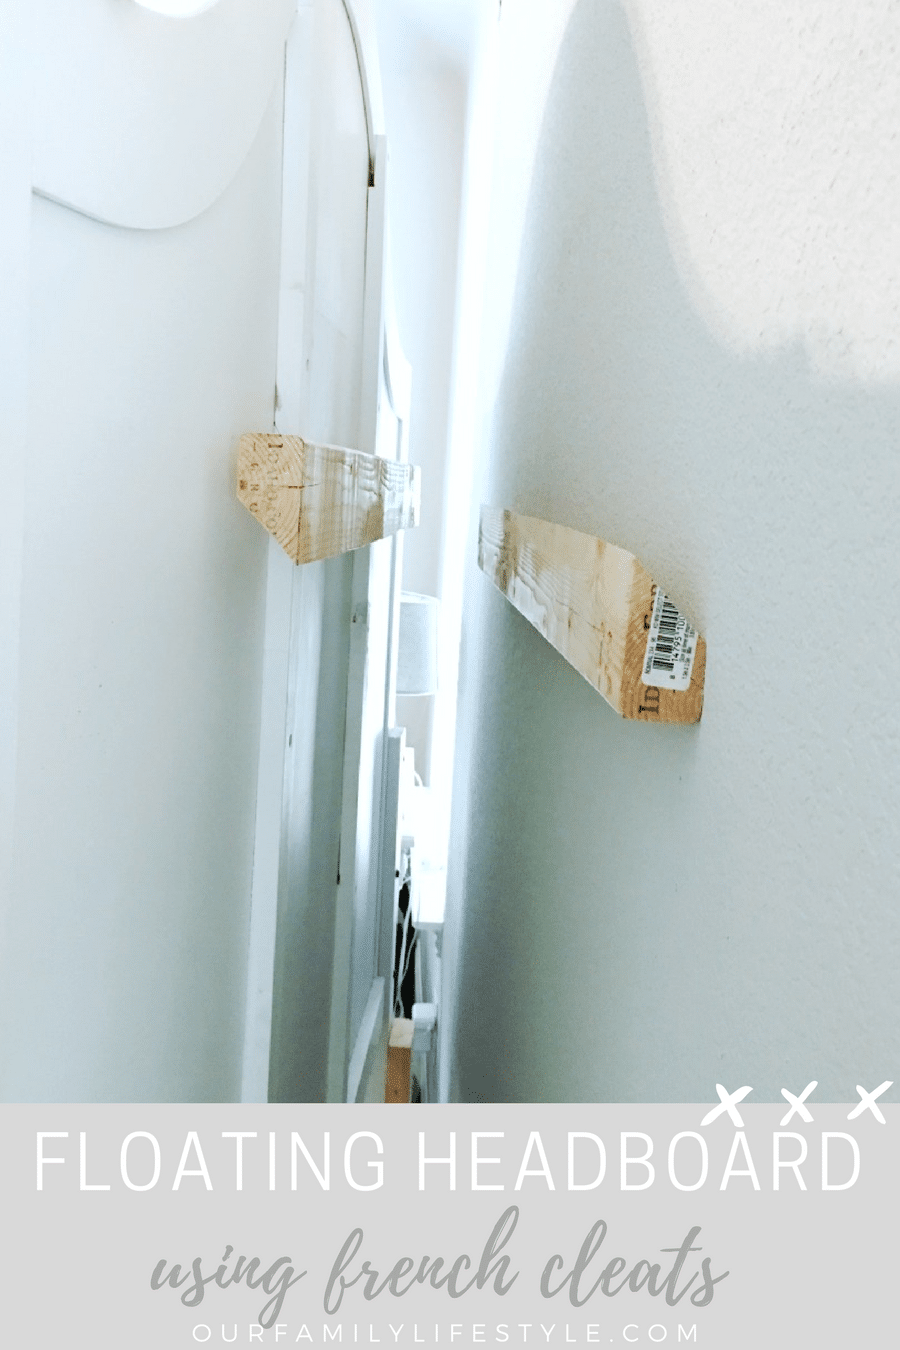 Headboard To The Wall Using French Cleats, How To Attach Headboard A Wall